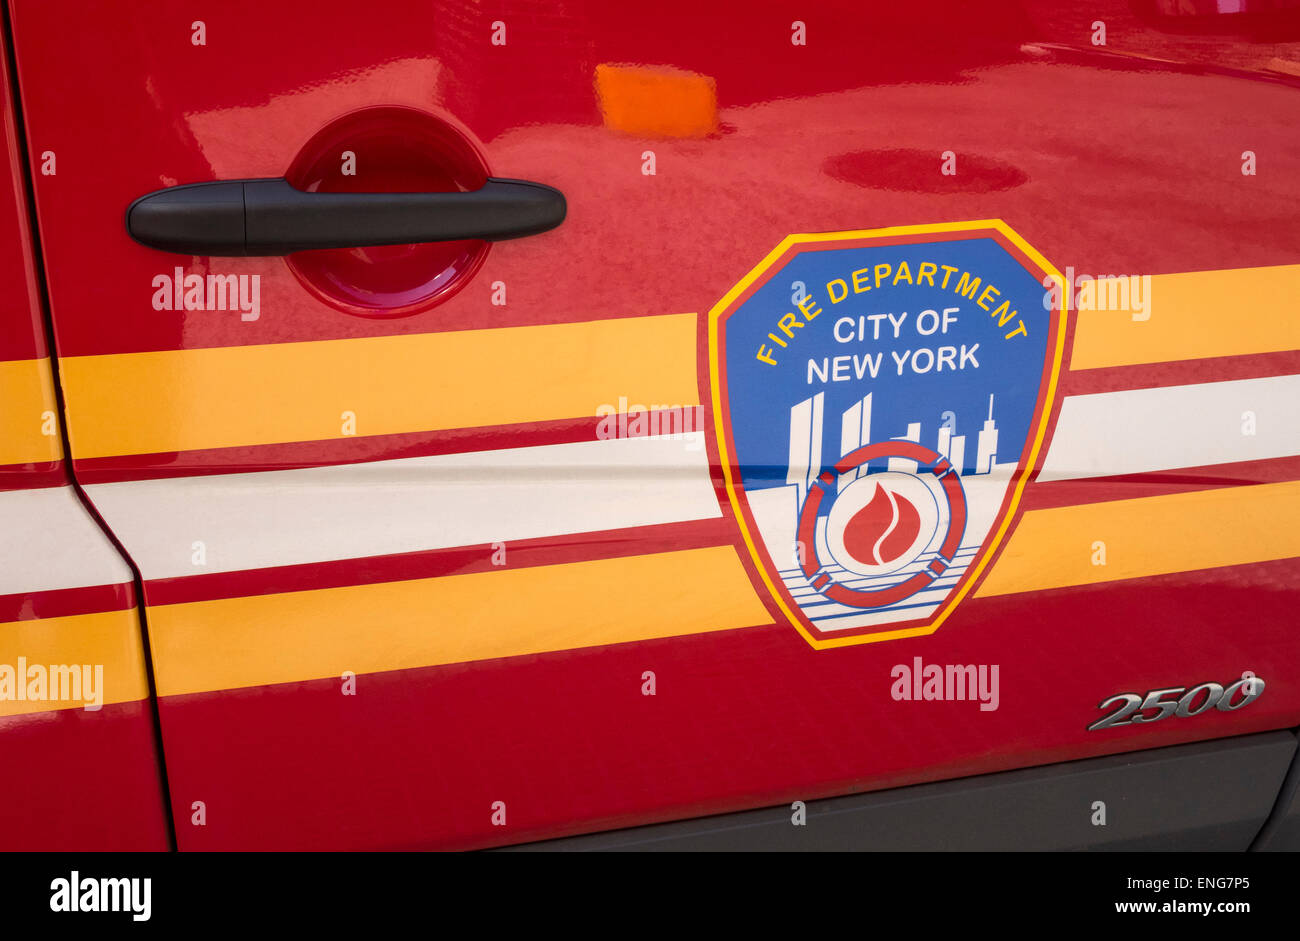 FDNY Identification logo on the side of a New York Fire Department vehicle Stock Photo